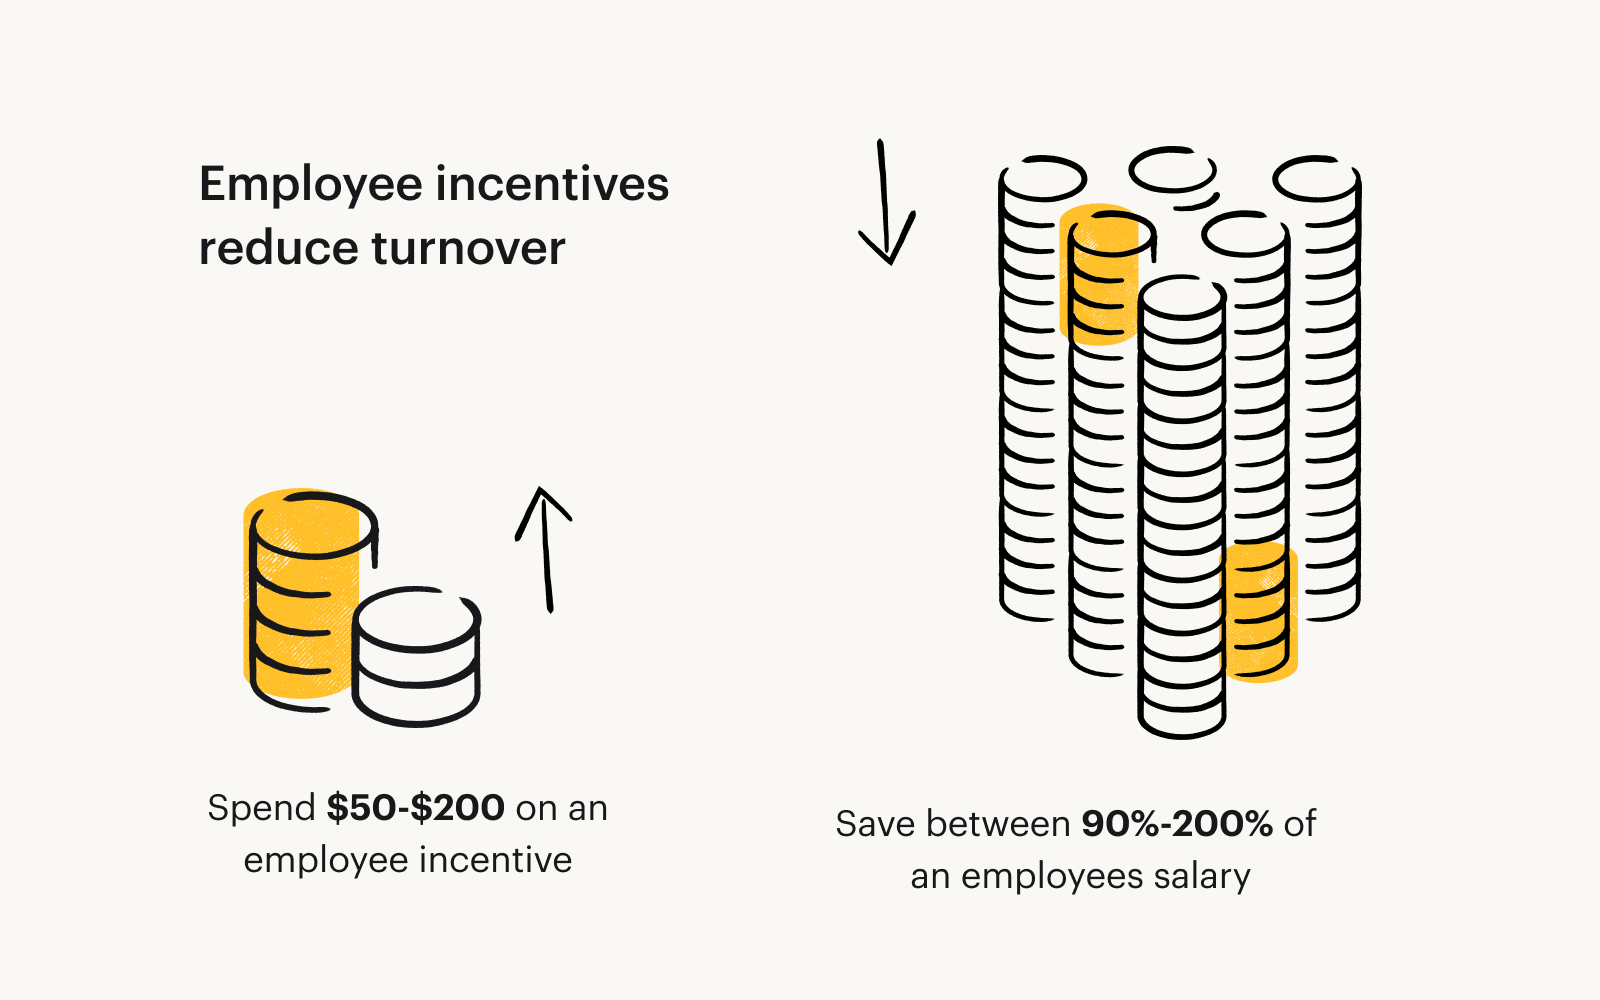 Text reads: "Employee incentives reduce turnover". A small stack of coins represents the cost of incentives, while a large stack of coins represents the cost of replacing employees that leave.